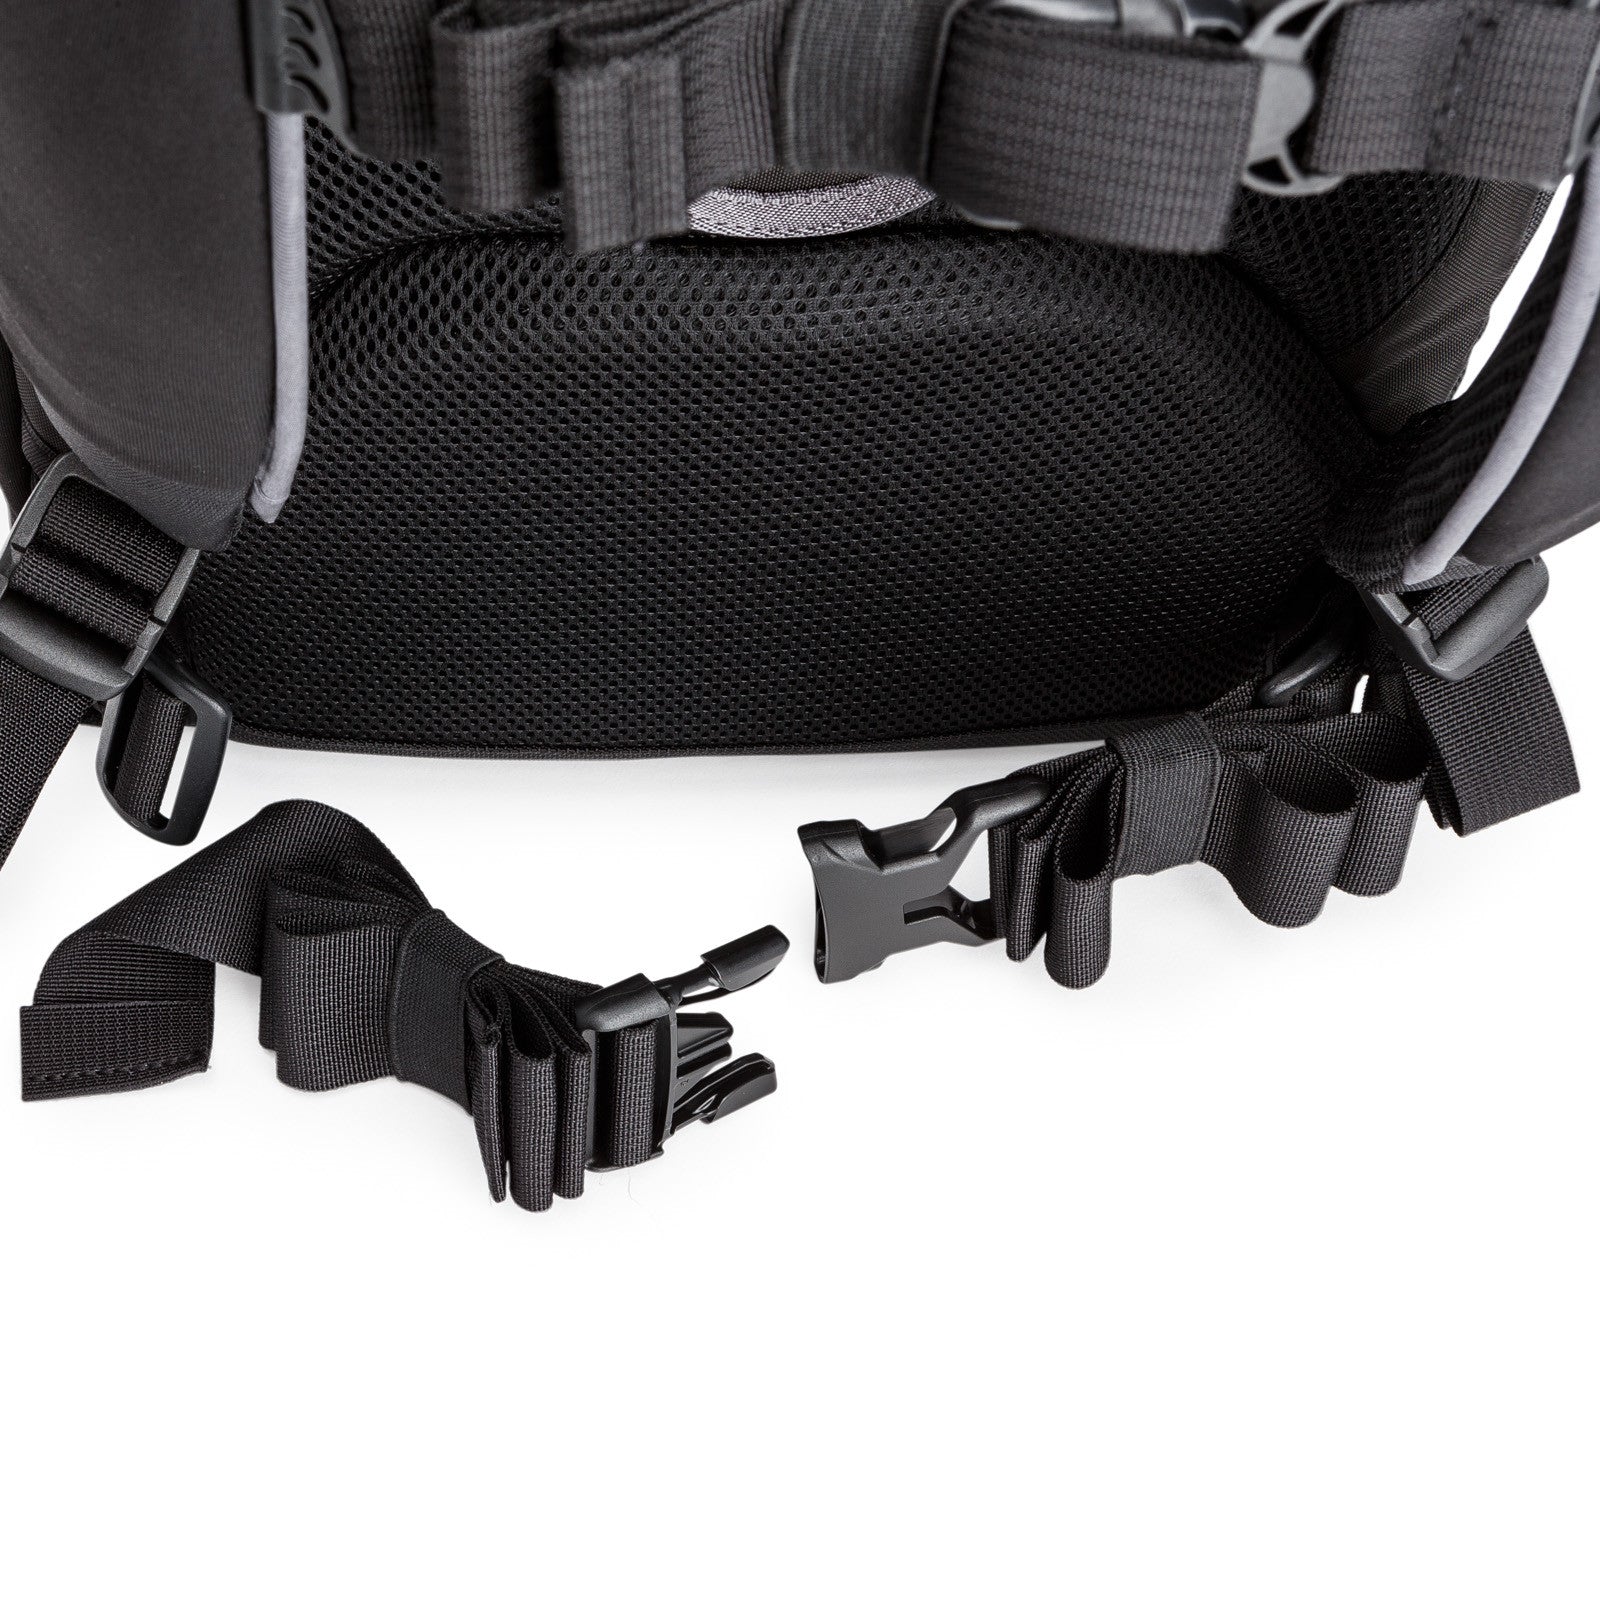 Removable padded waist-belt allows for use of Thin Skin or Pro Speed Belt Camera Belts